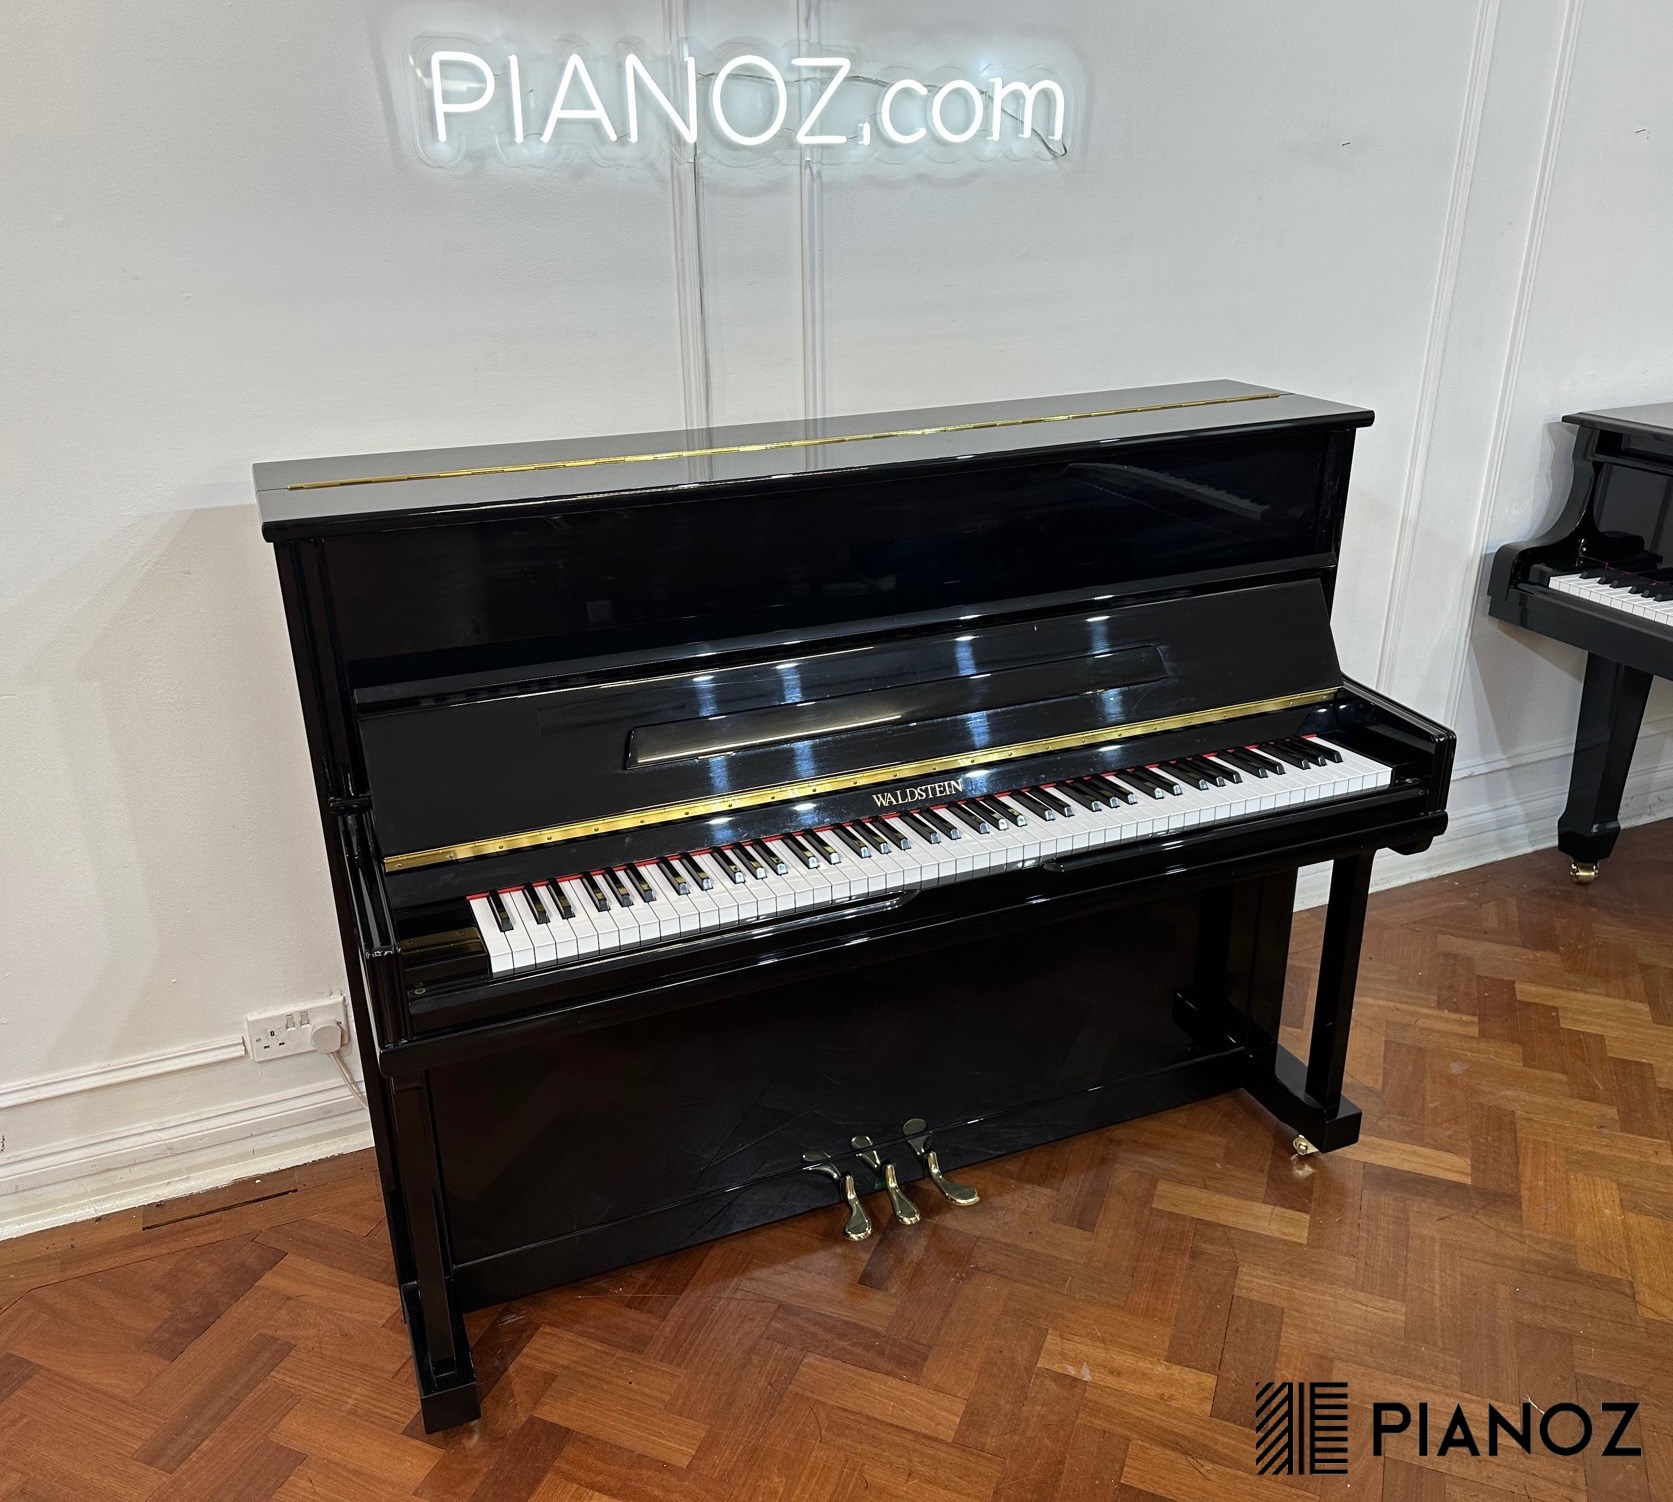 Waldstein 118 Black High Gloss Upright Piano piano for sale in UK